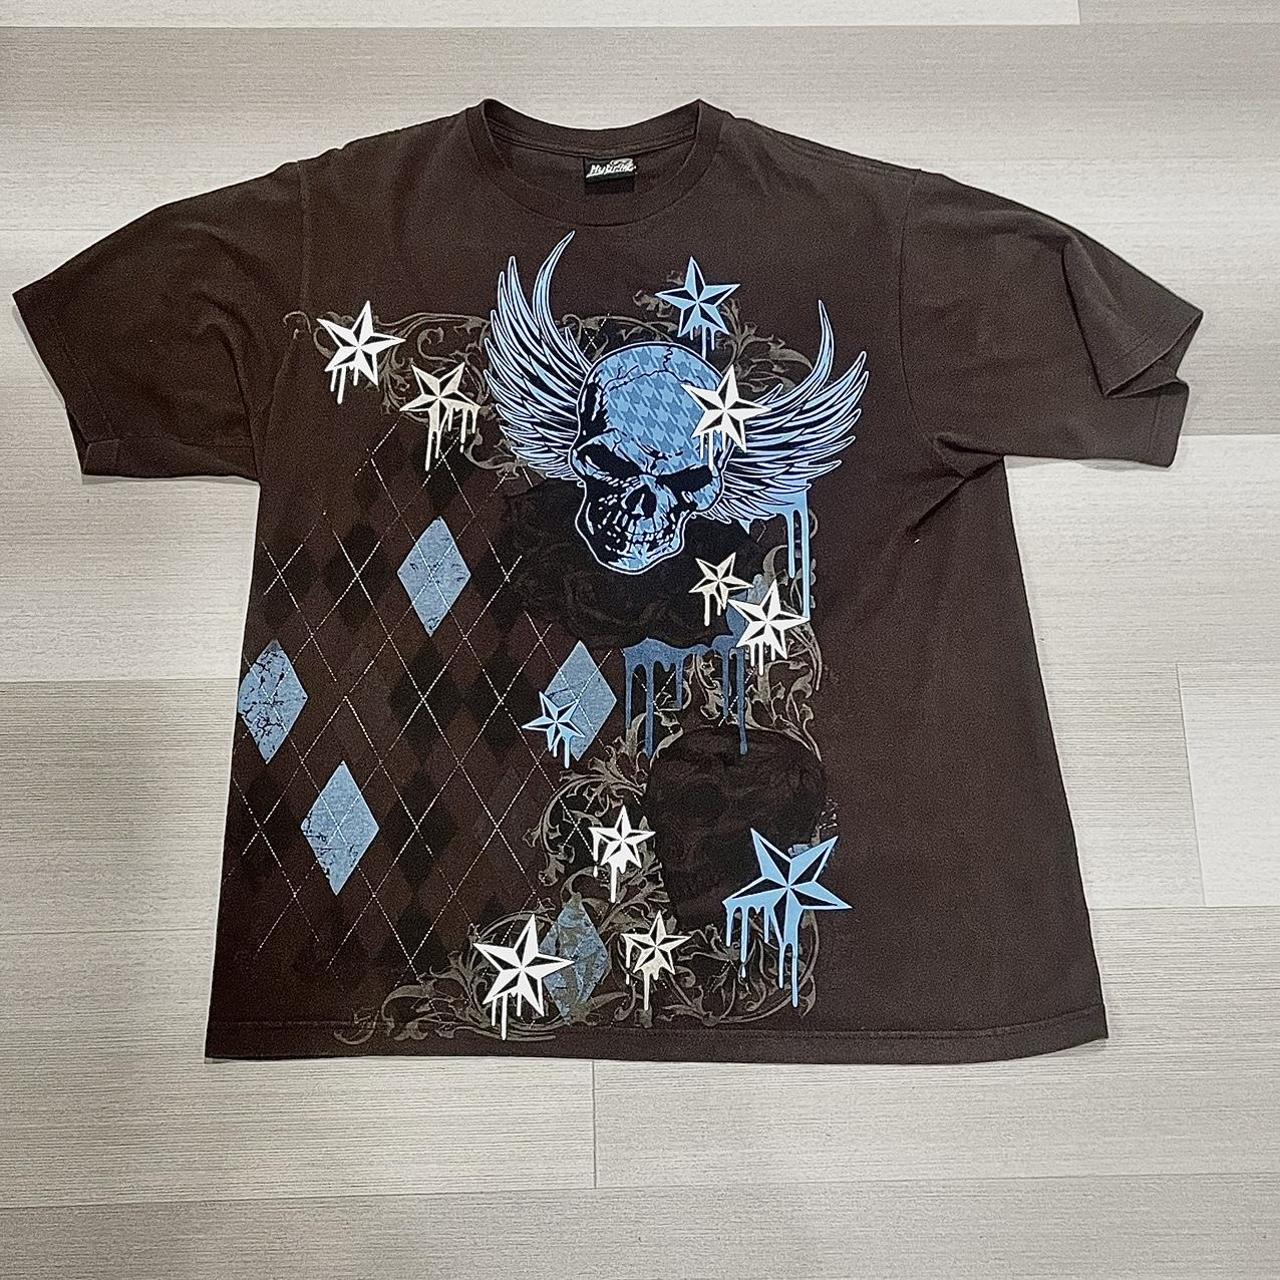 Hybrid Apparel Men's Brown and Blue T-shirt